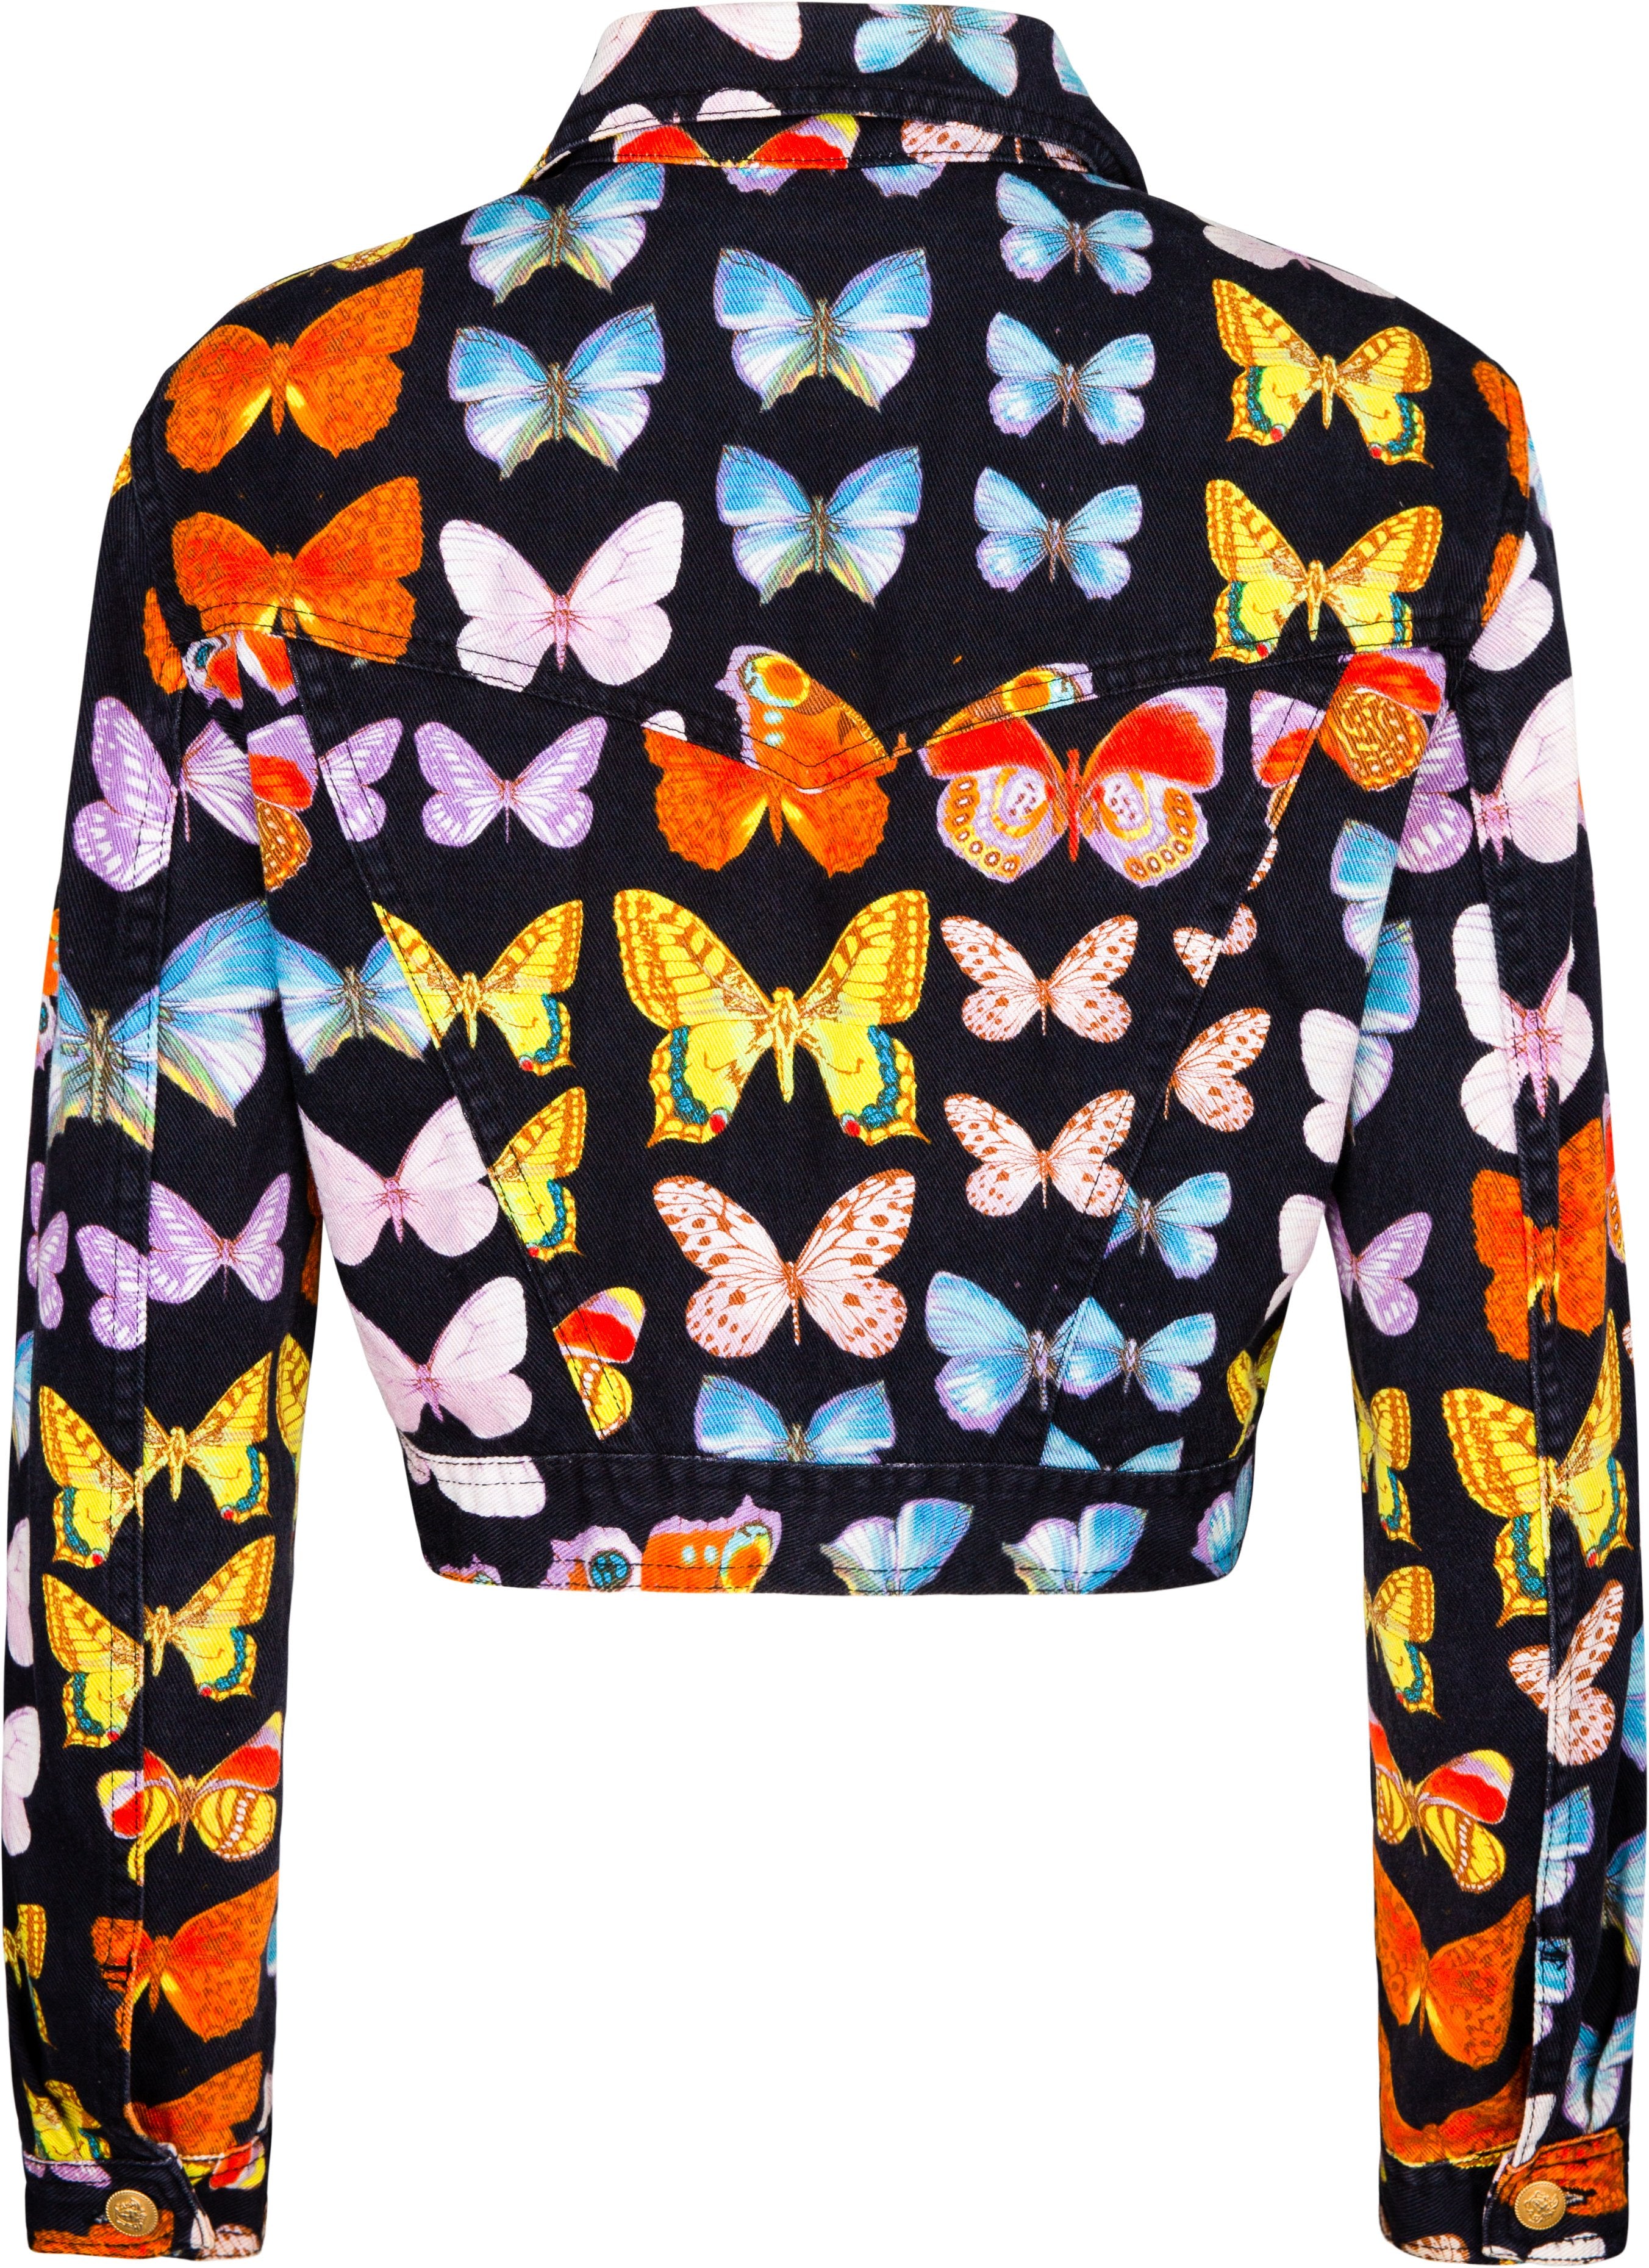 Gianni Versace Spring 1995 Butterfly Jacket | EL CYCER